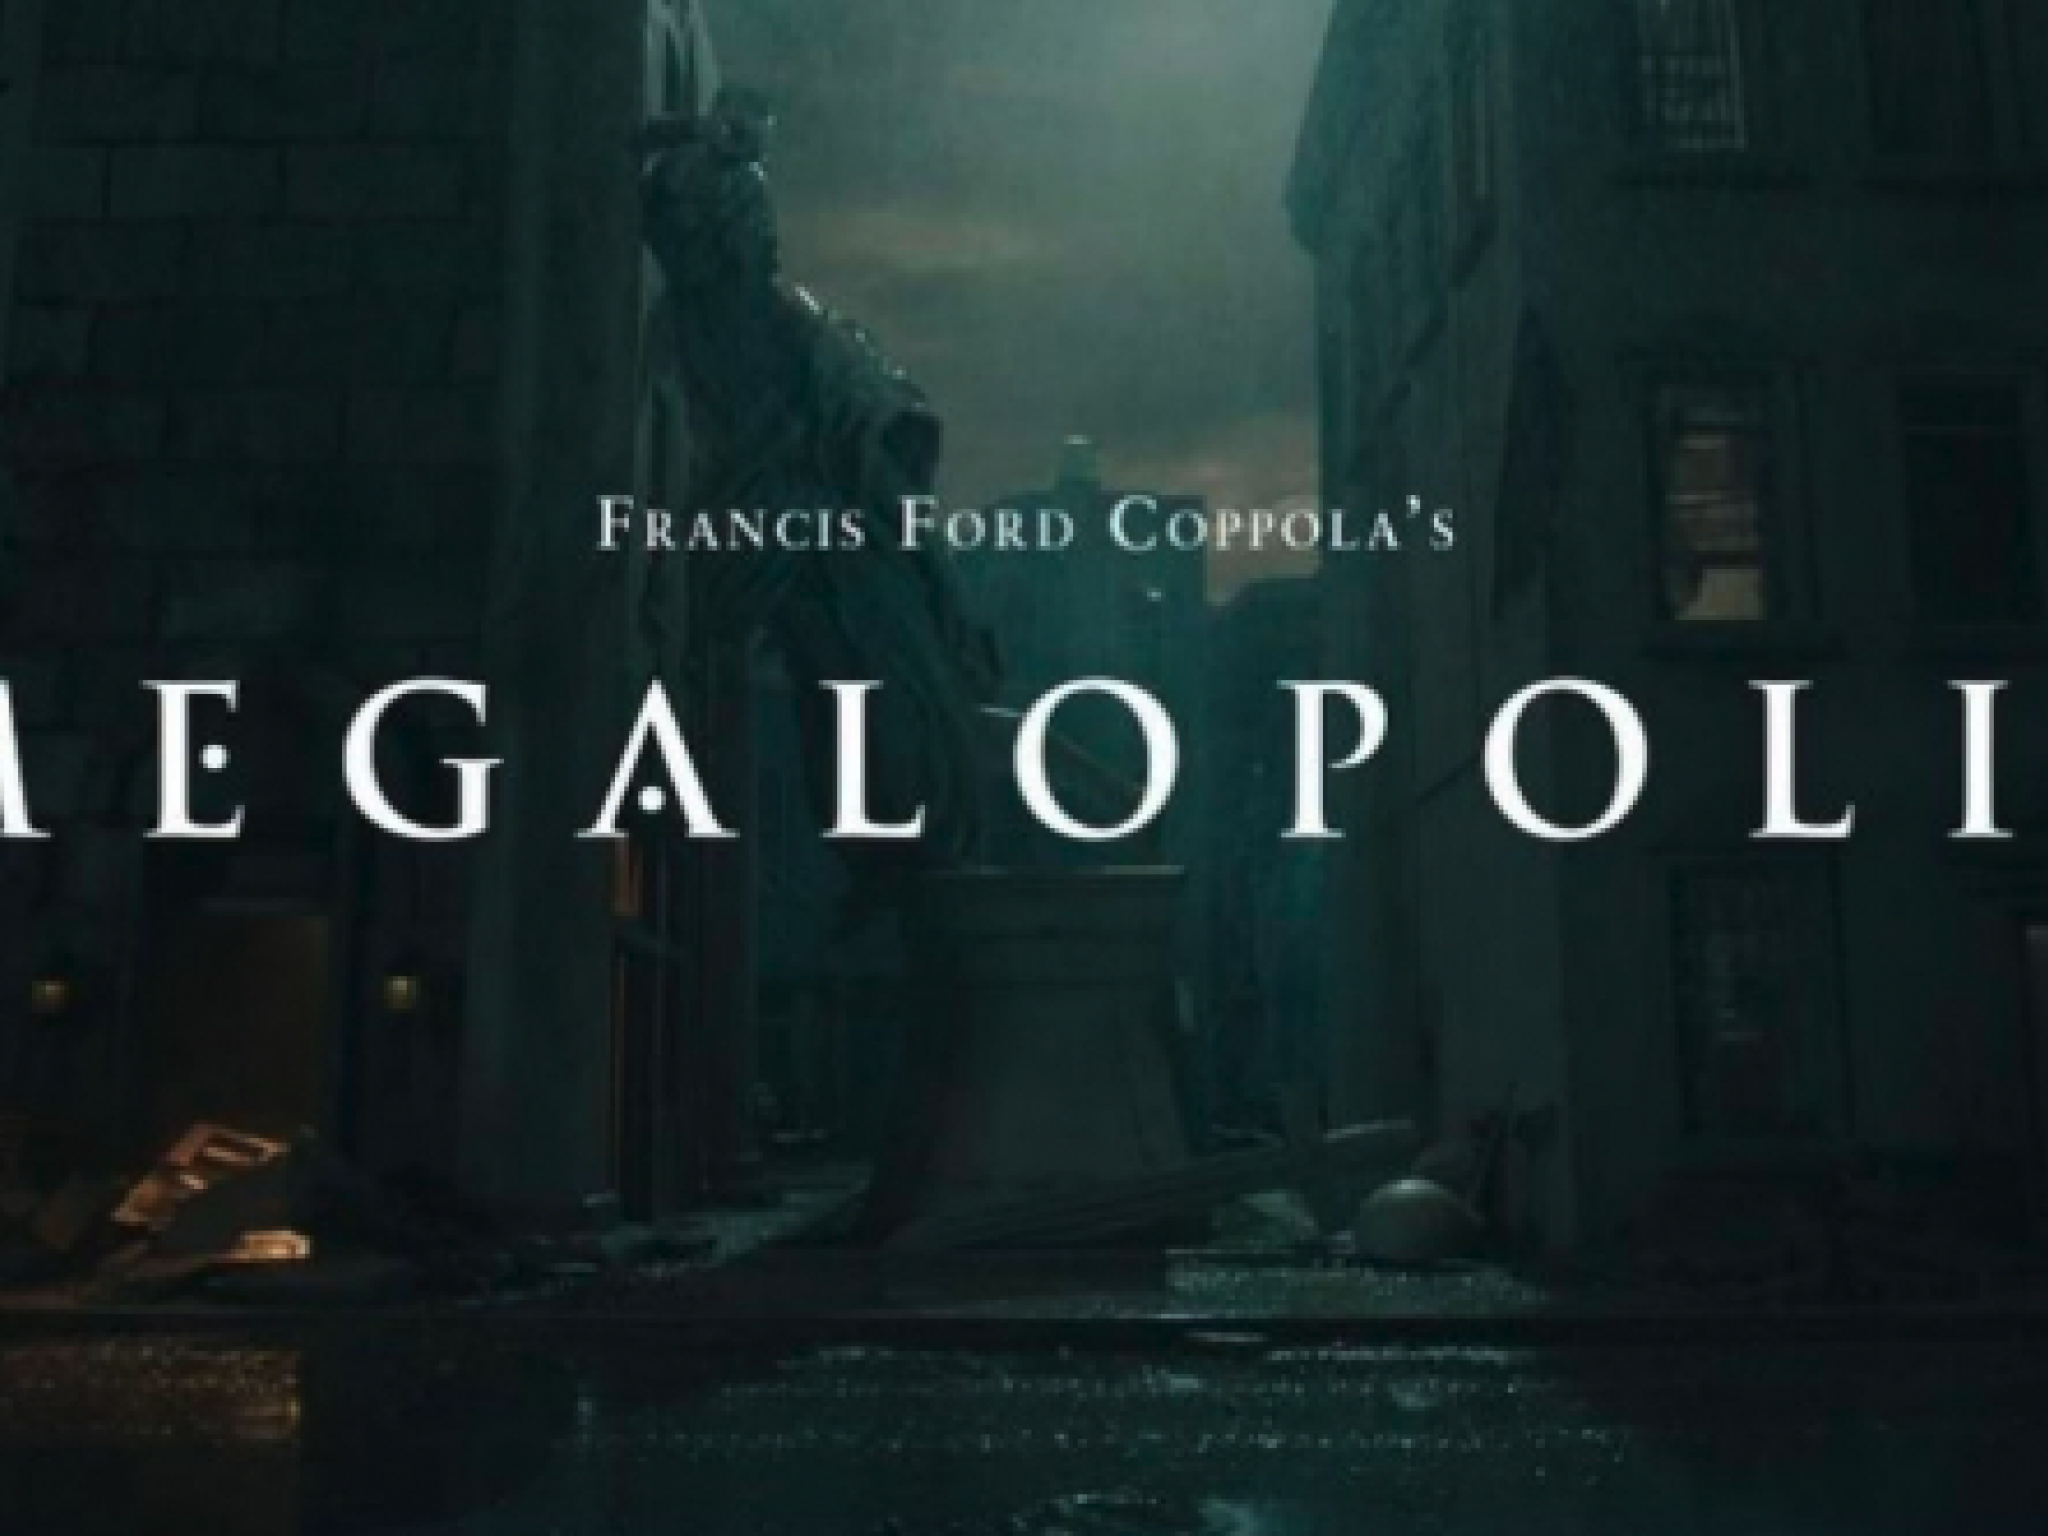  francis-ford-coppola-spent-120m-self-financing-passion-project-what-the-gambit-could-mean-for-the-film-industry 